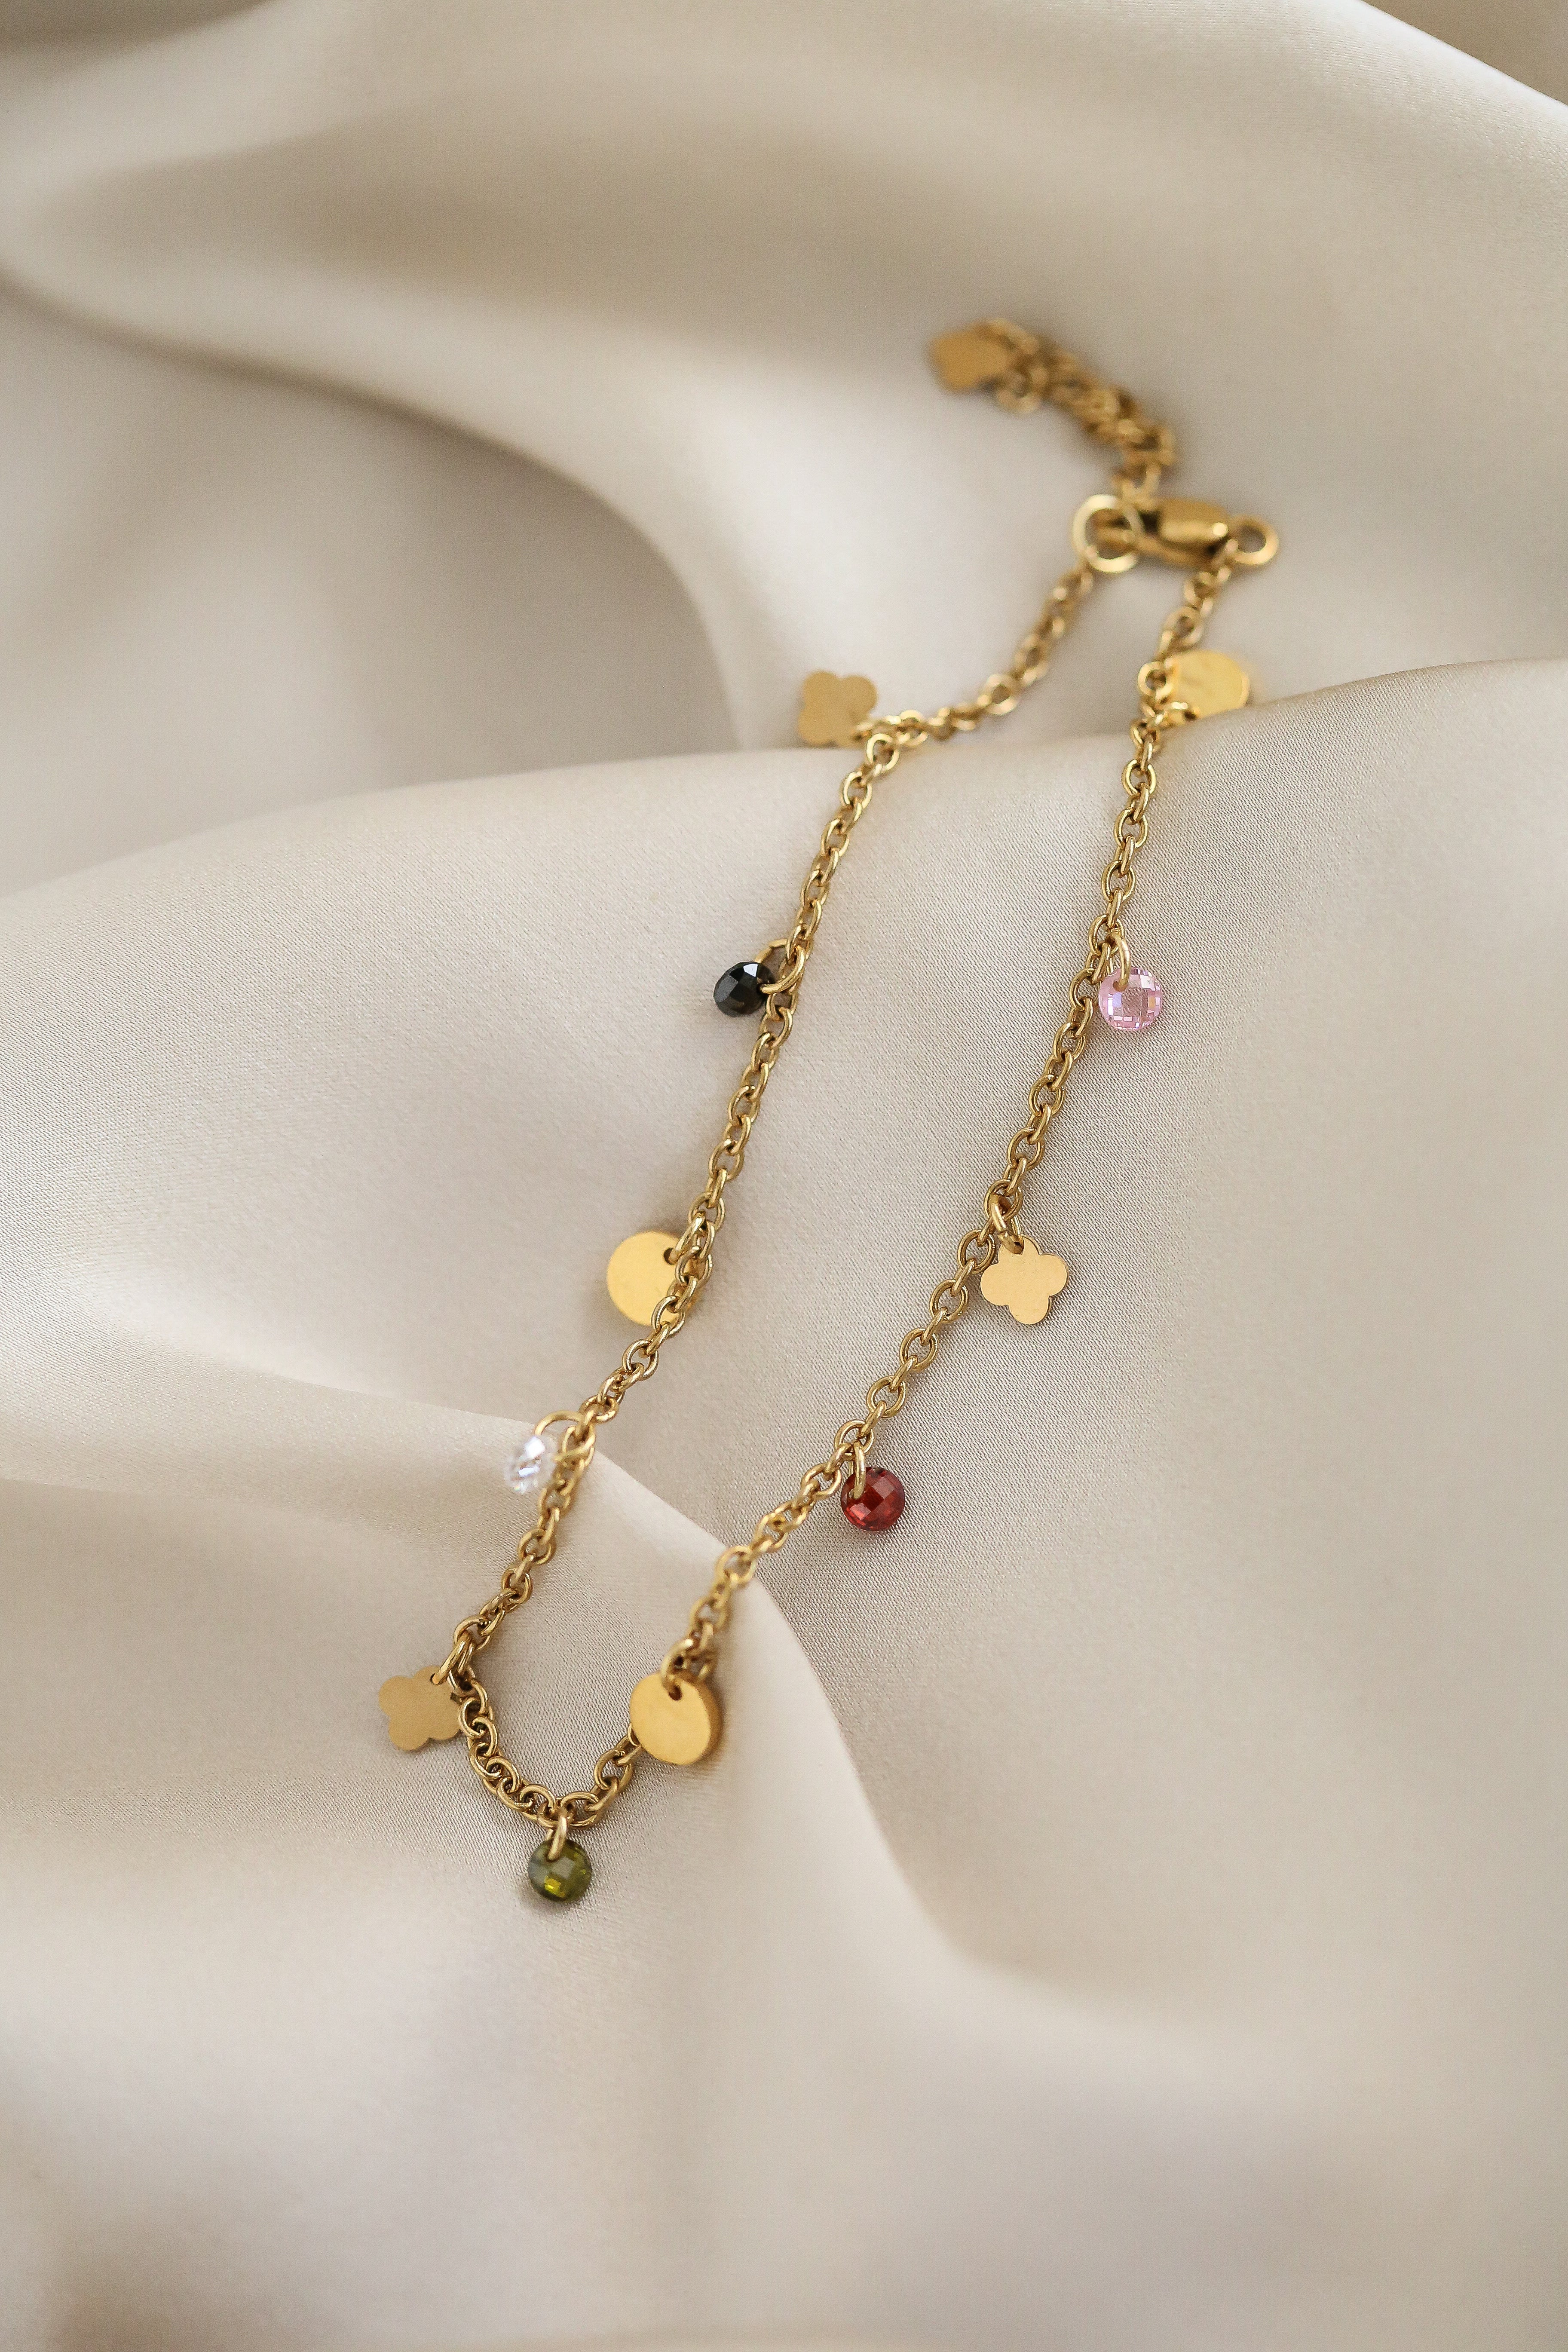 Nellie Anklet - Boutique Minimaliste has waterproof, durable, elegant and vintage inspired jewelry